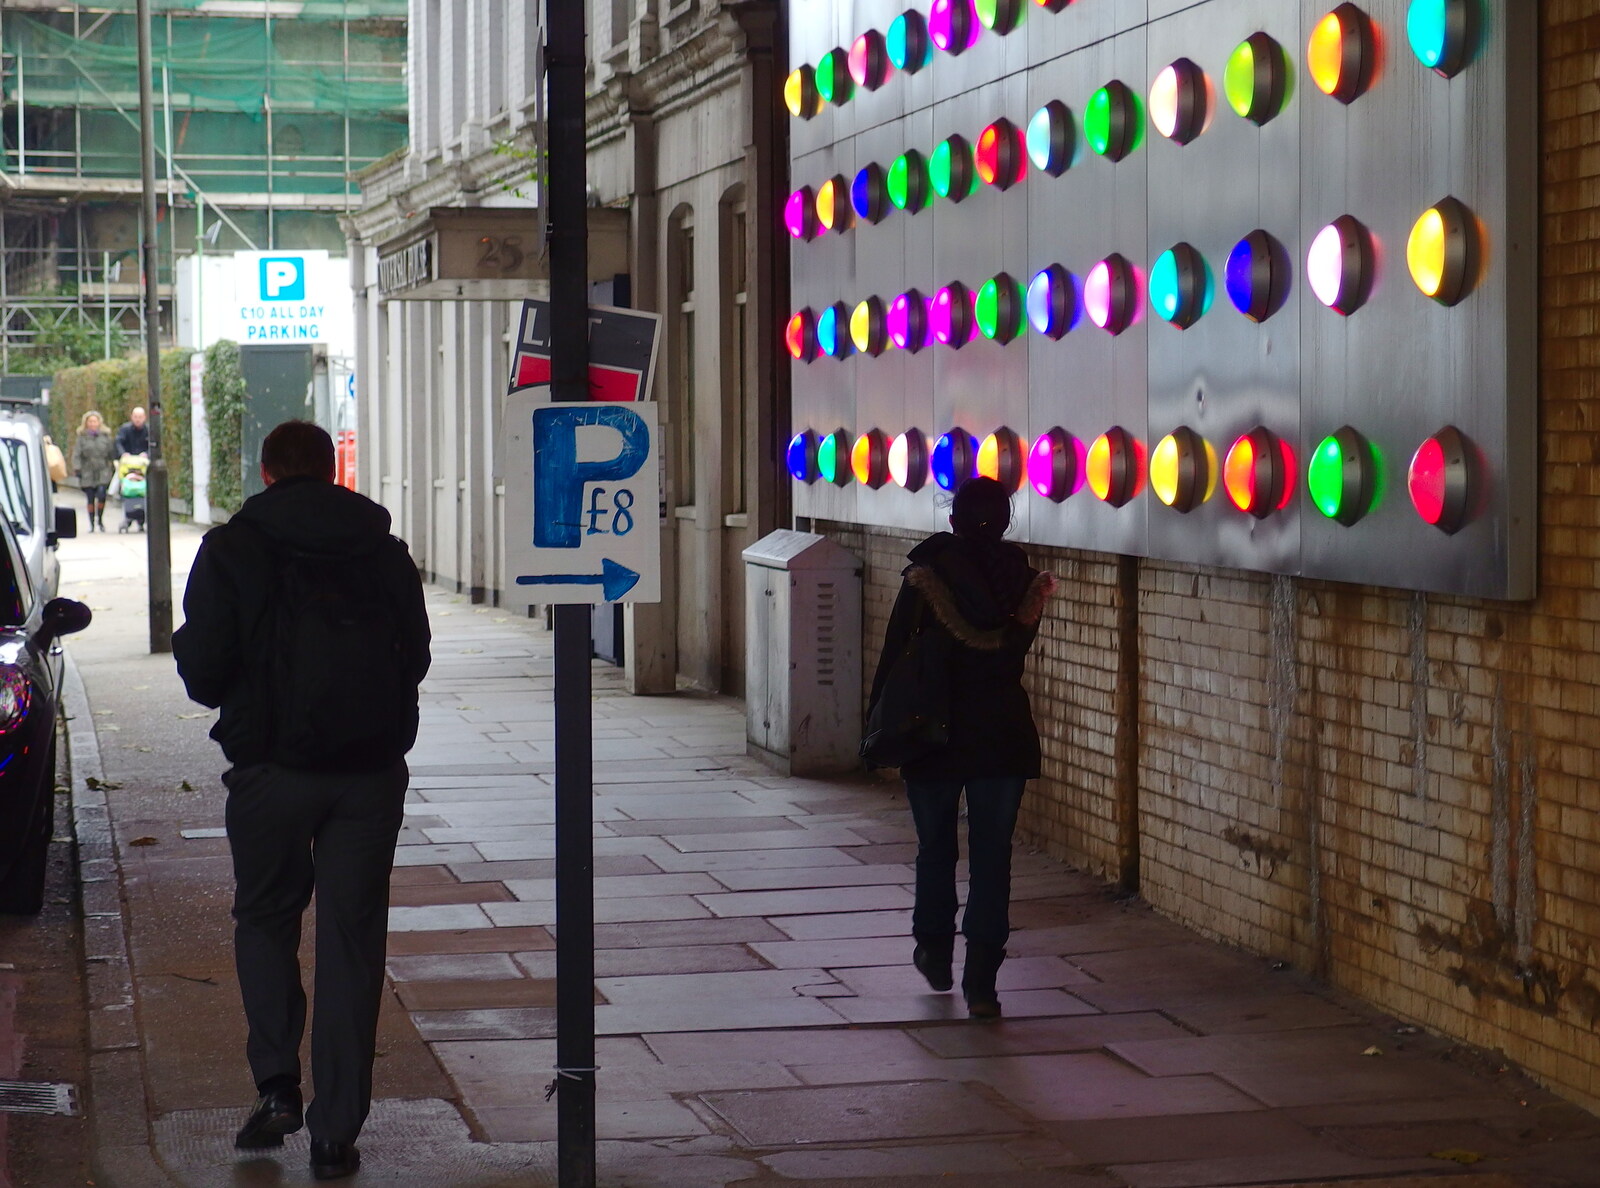 SwiftKey's Arcade Cabinet, and the Streets of Southwark, London - 5th December 2013: The Smarties lights on Southwark Street